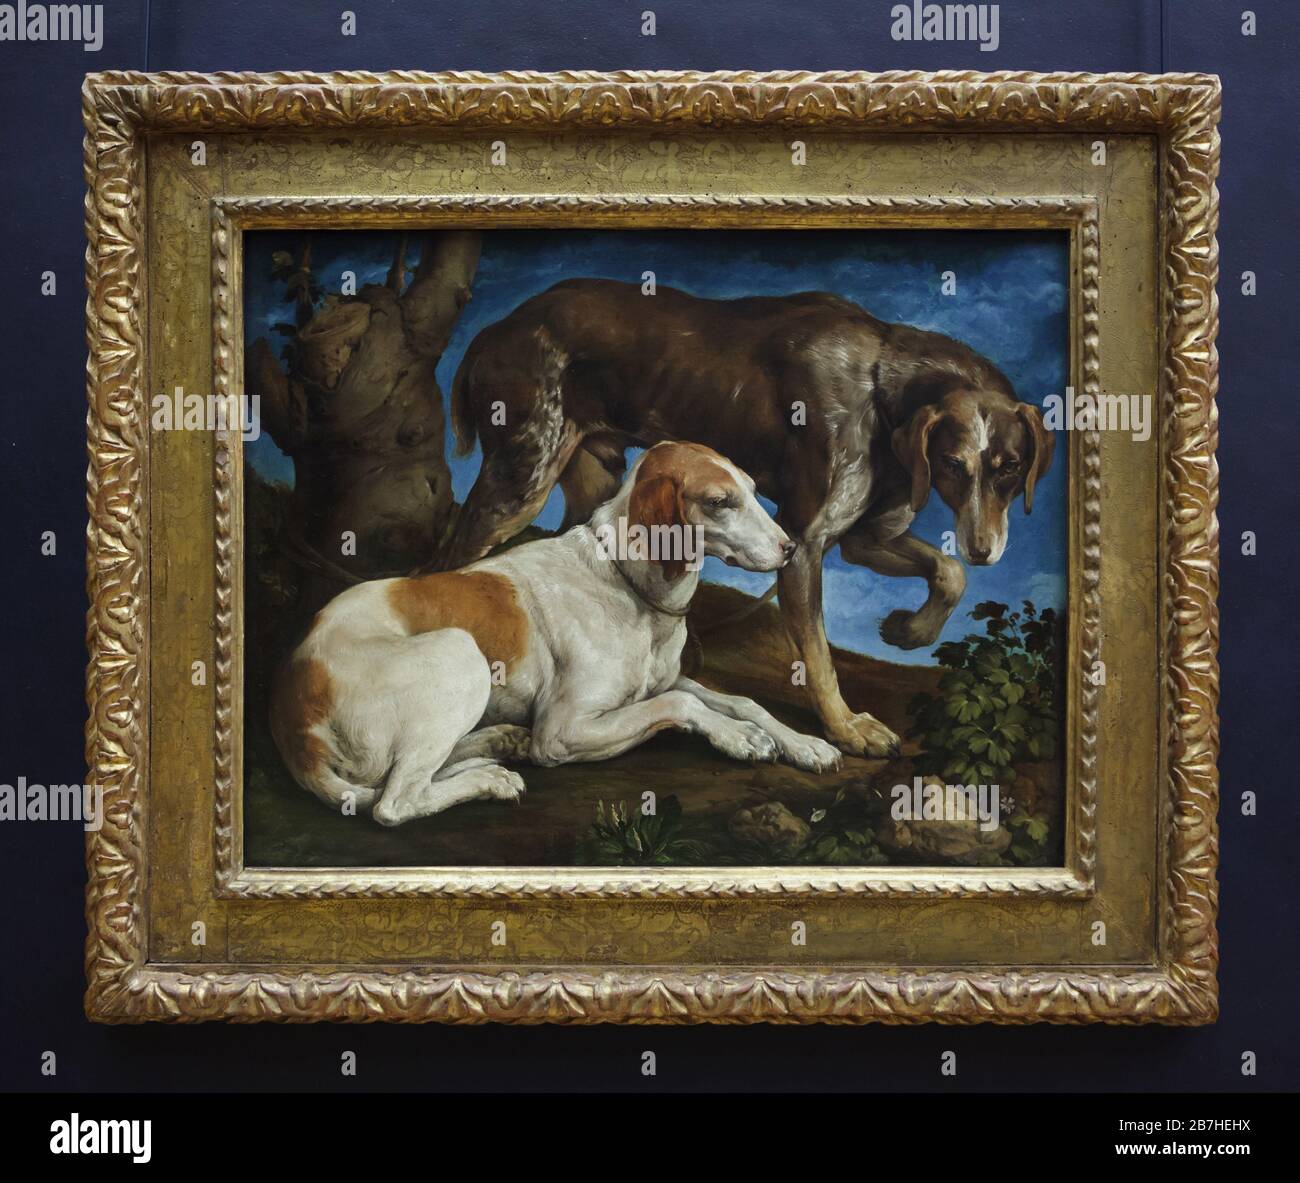 Painting 'Two hunting dogs tied to a tree stump' by Italian Renaissance painter Jacopo Bassano (1548) on display in the Louvre Museum in Paris, France. Stock Photo